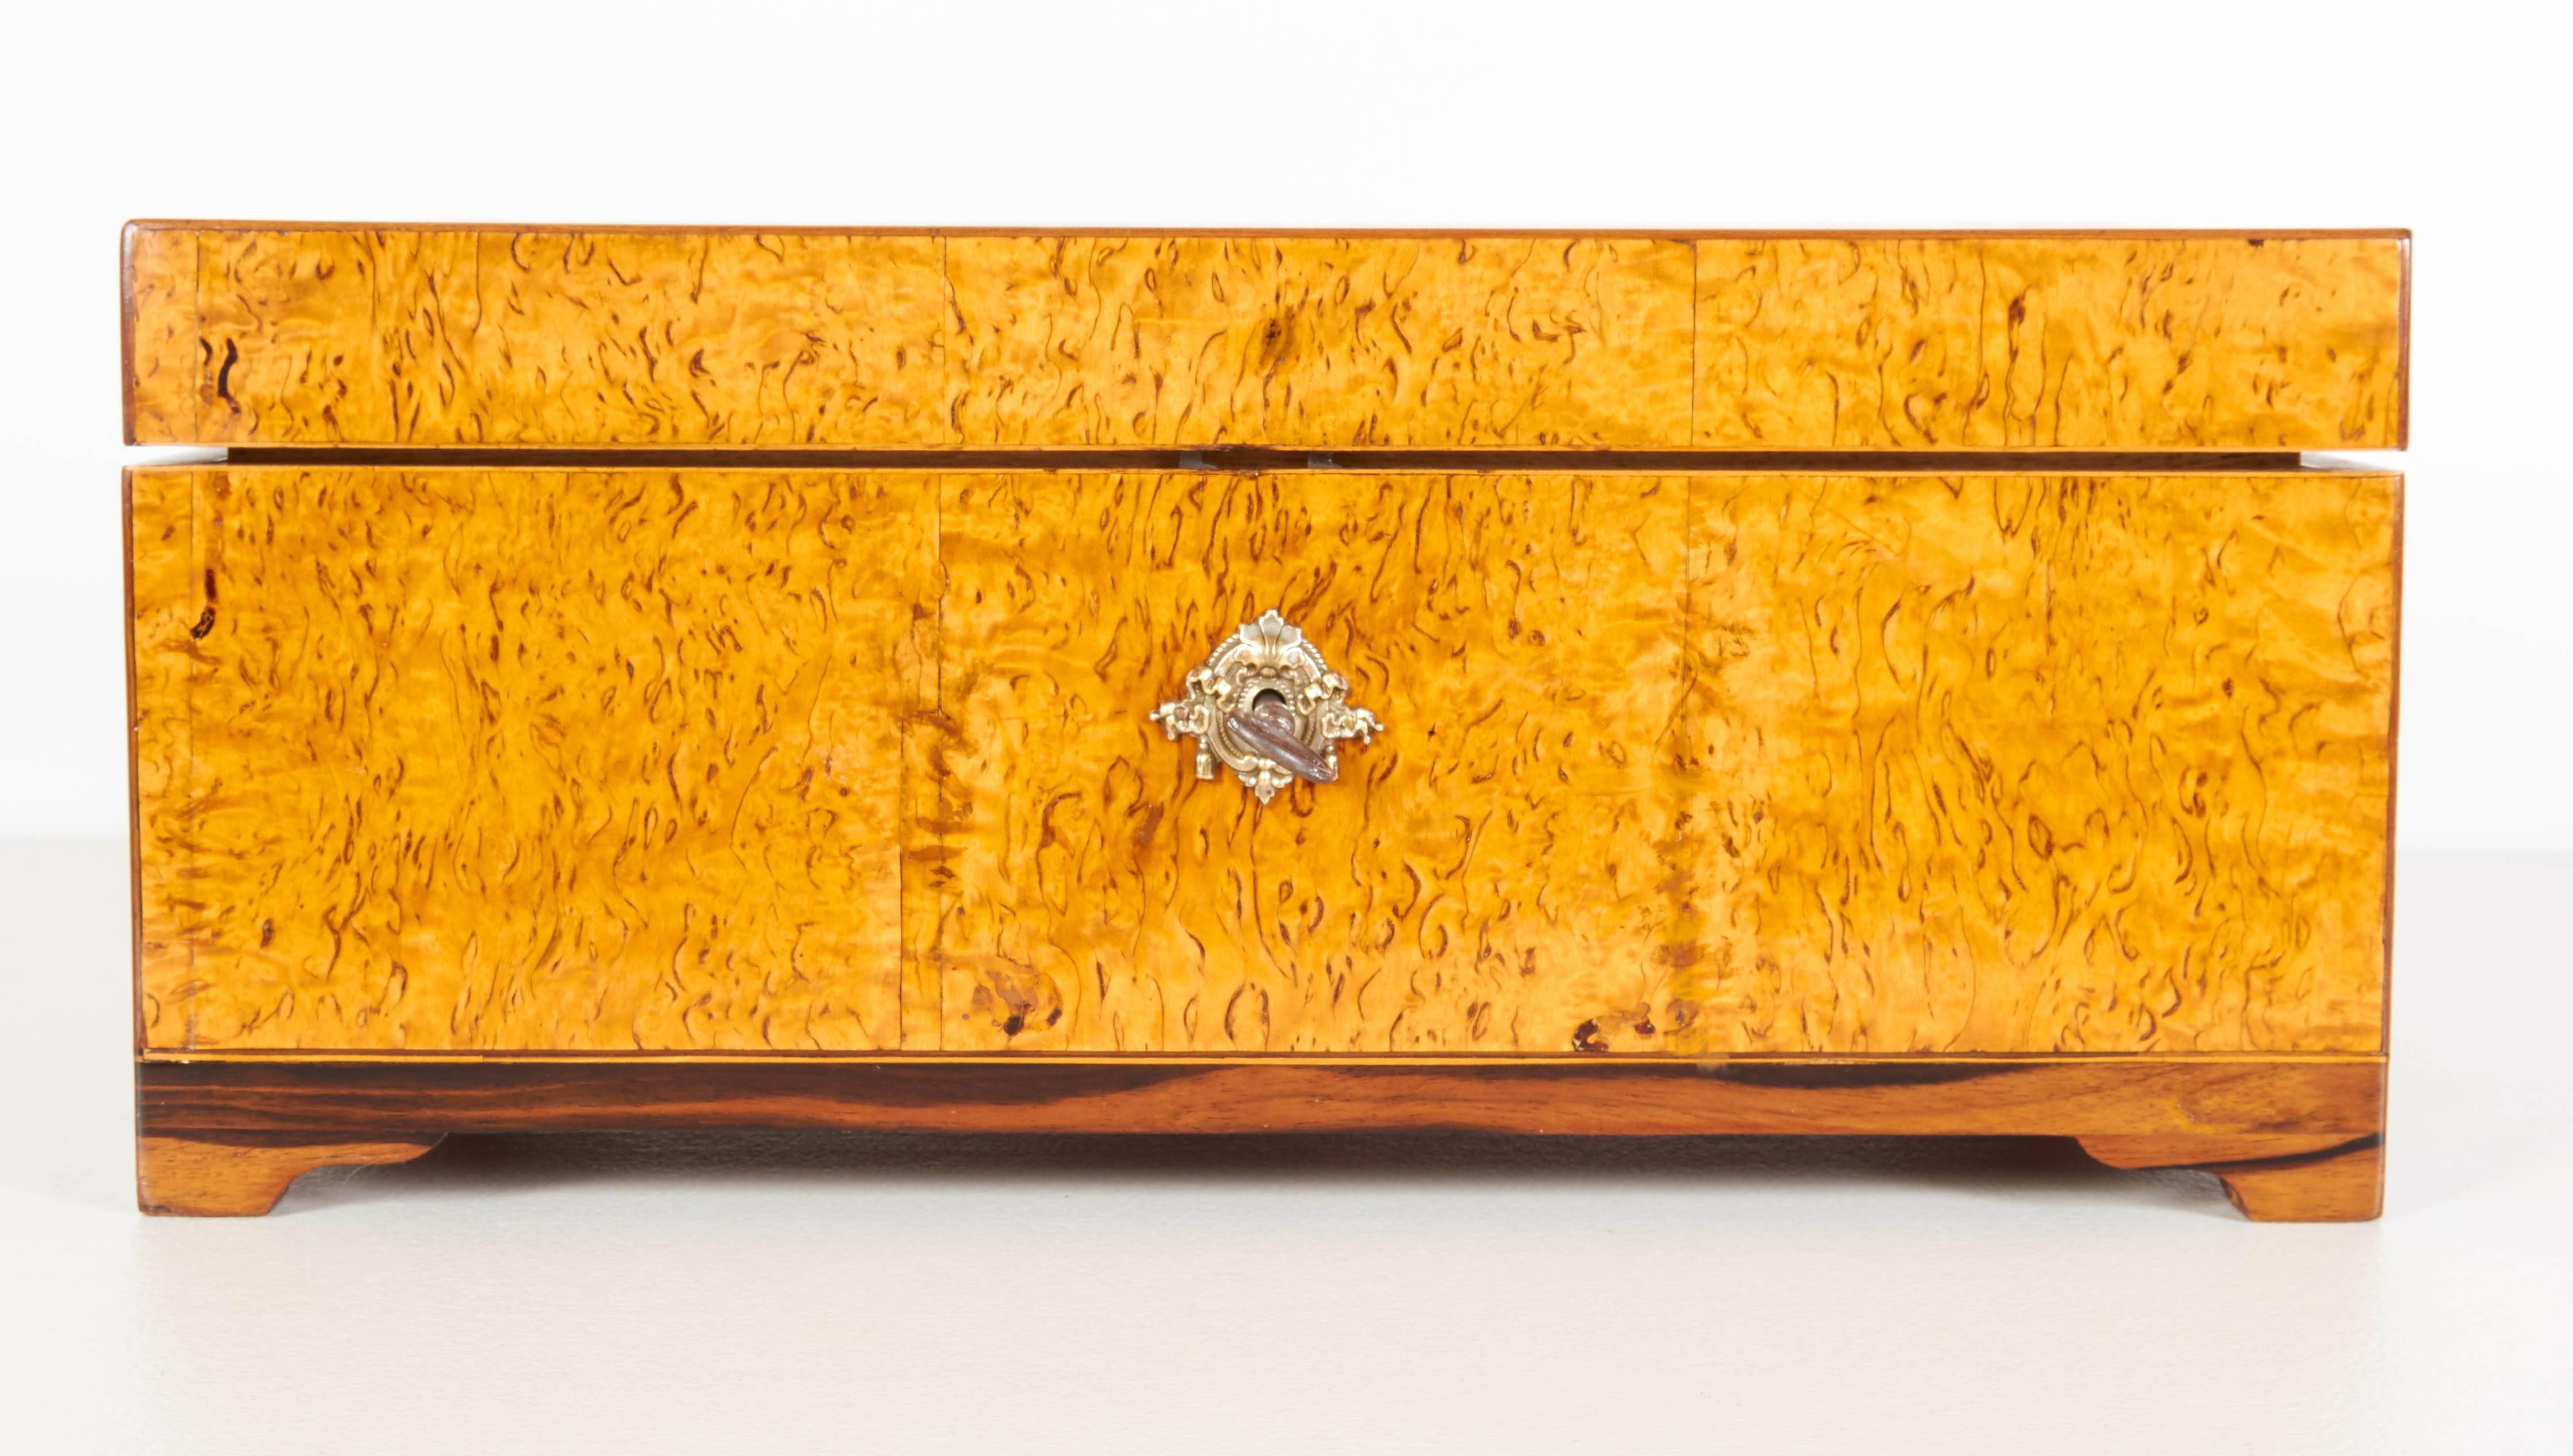 A fine Danish Empire inlaid birchroot, palisander and mahogany box, early 19th century, the rectangular hinged lid with an inlaid fan medallion, the fitted interior with numerous lidded compartments.